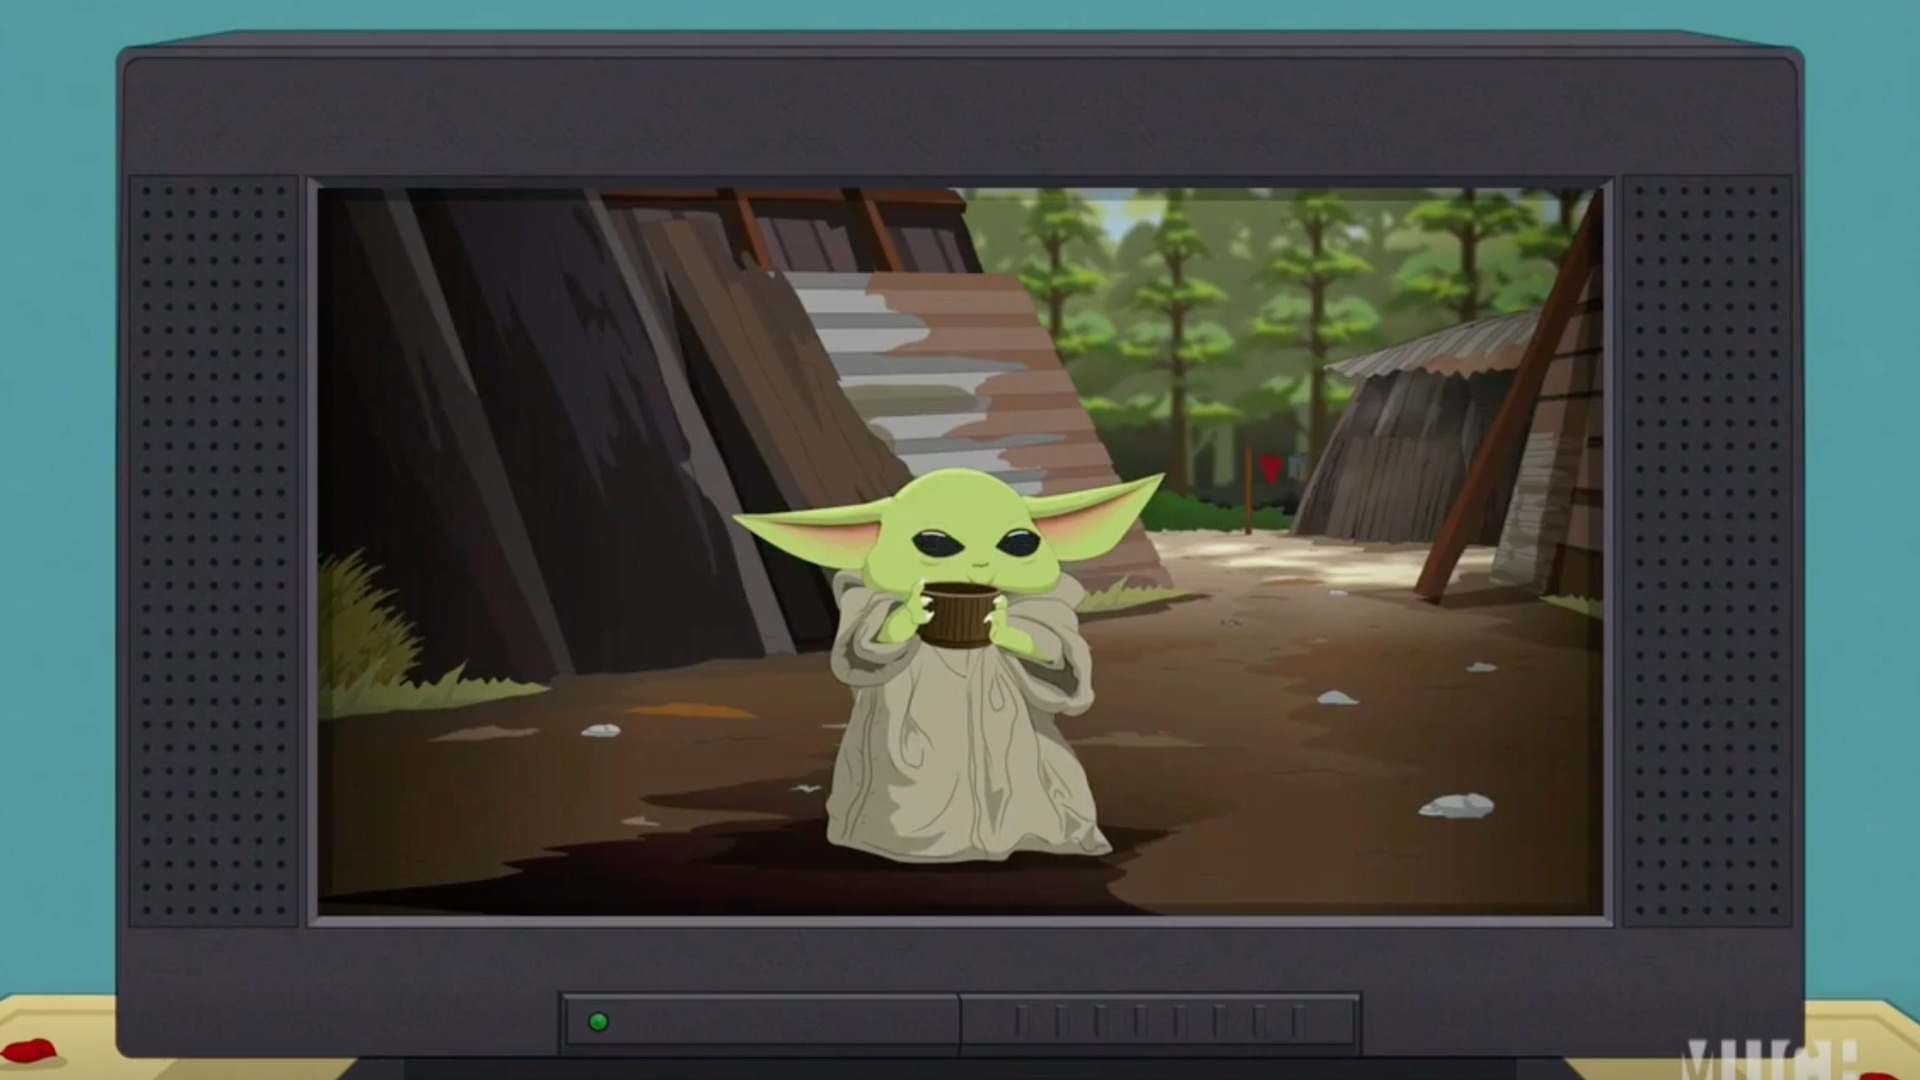 South Park Mocks Both Baby Yoda And Disney Plus In Latest Episode